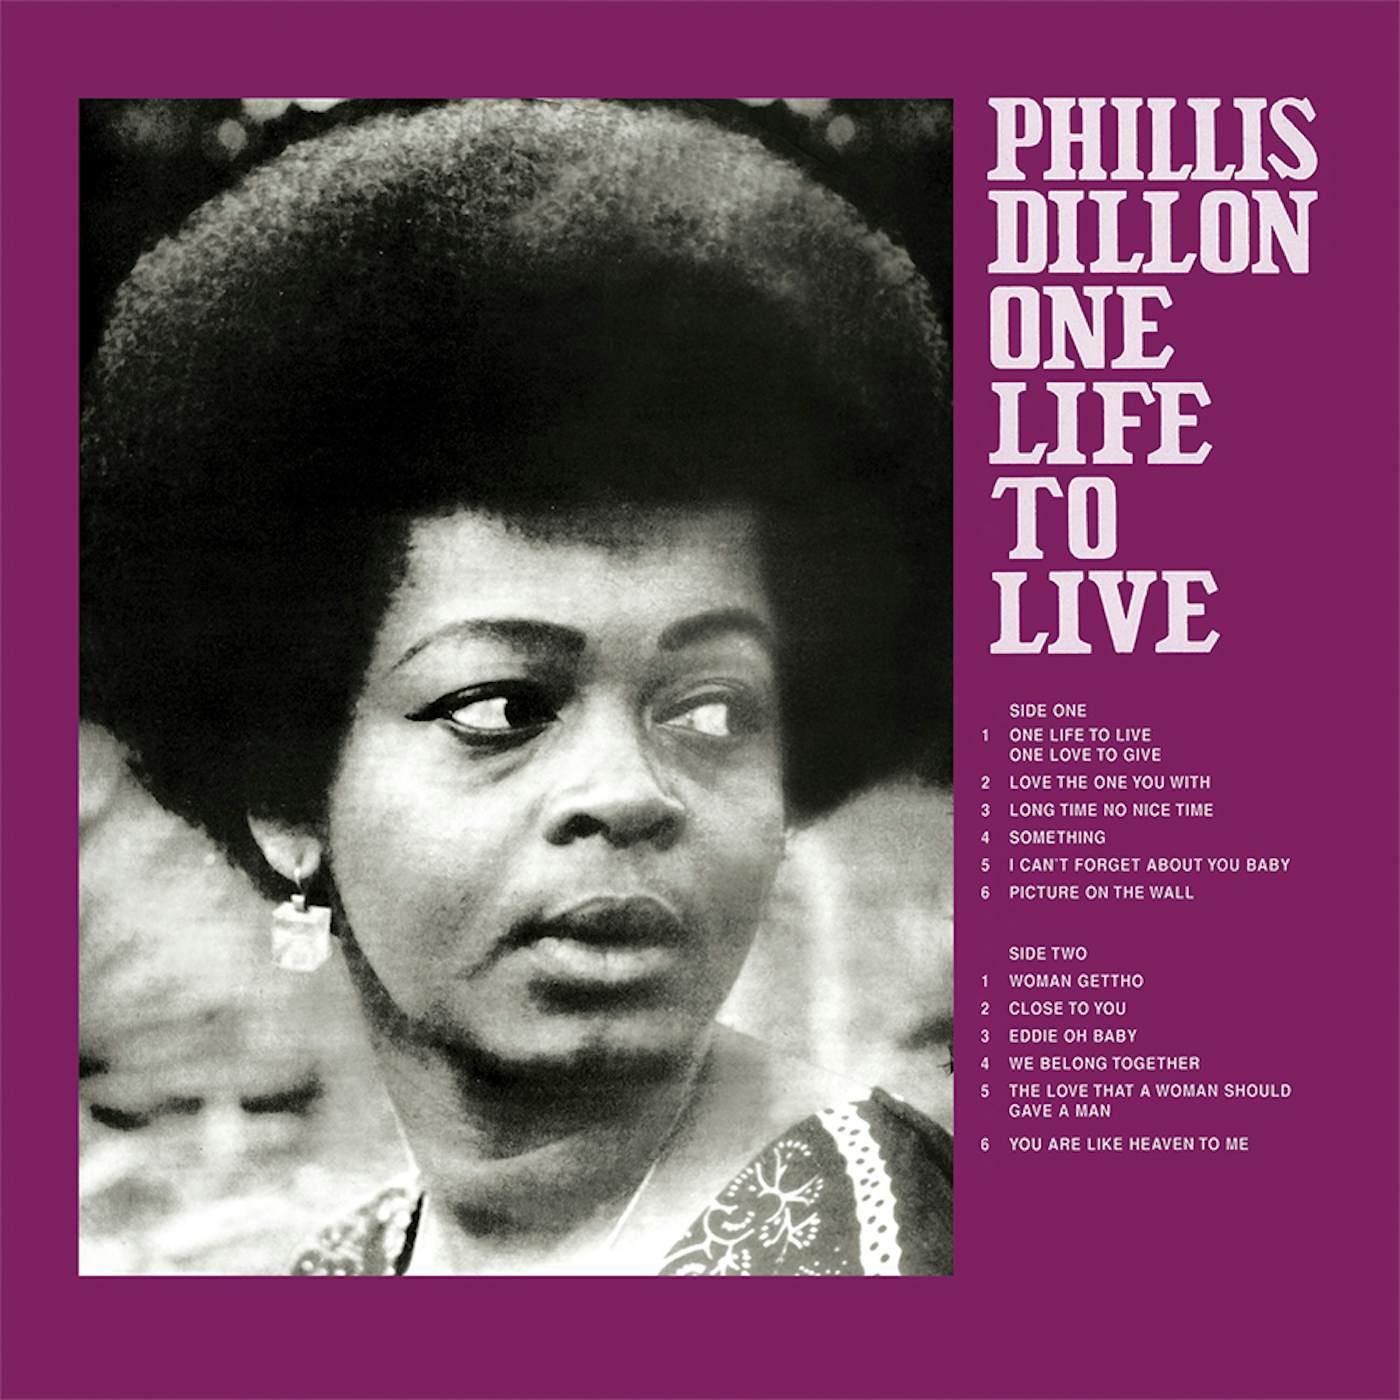 Phyllis Dillon ONE LIFE TO LIVE Vinyl Record